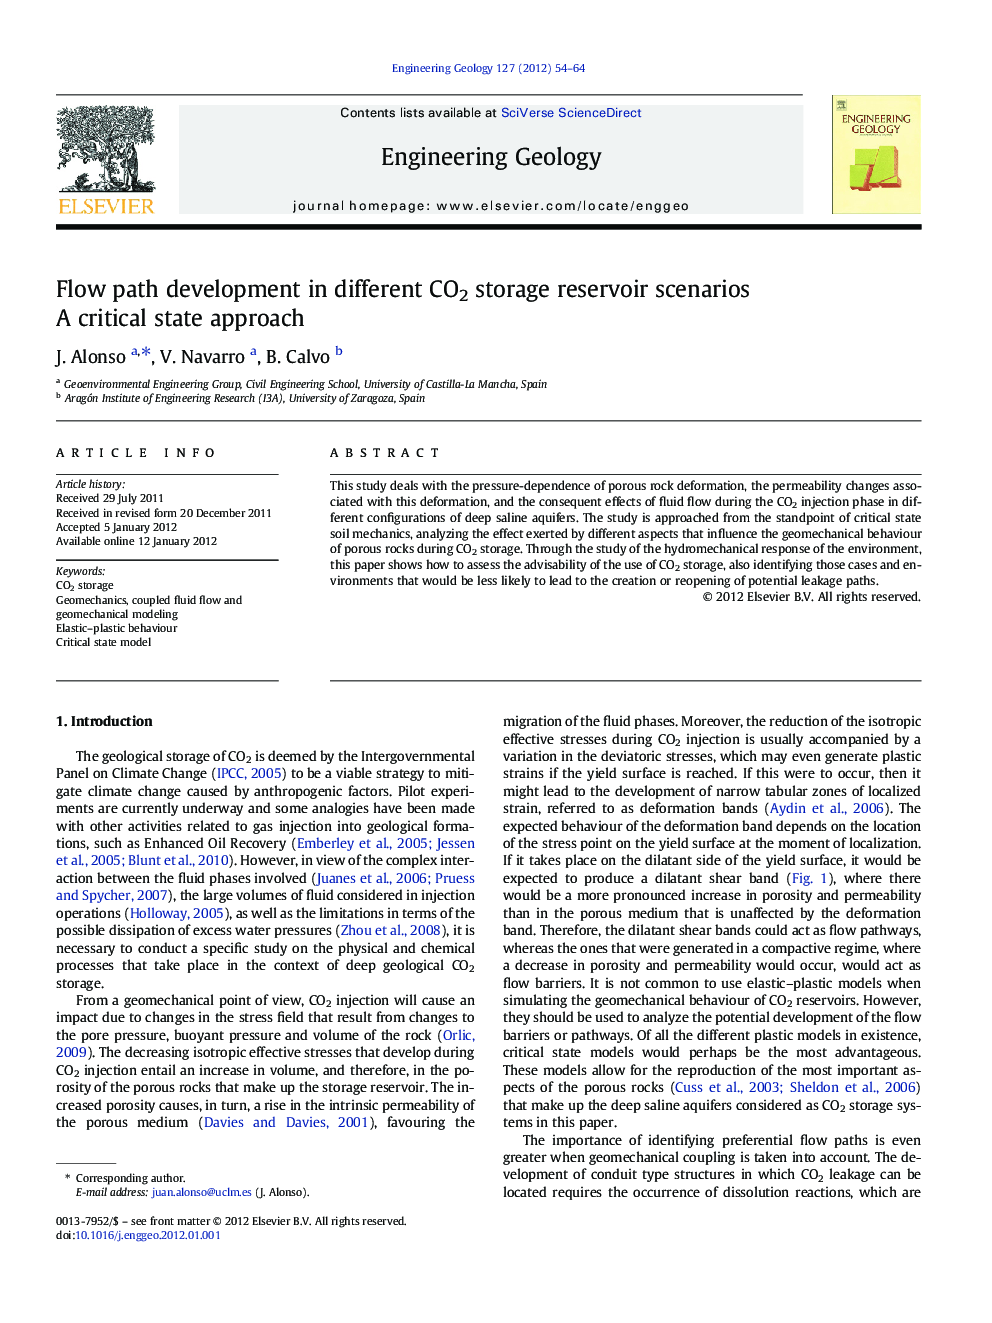 Flow path development in different CO2 storage reservoir scenarios: A critical state approach